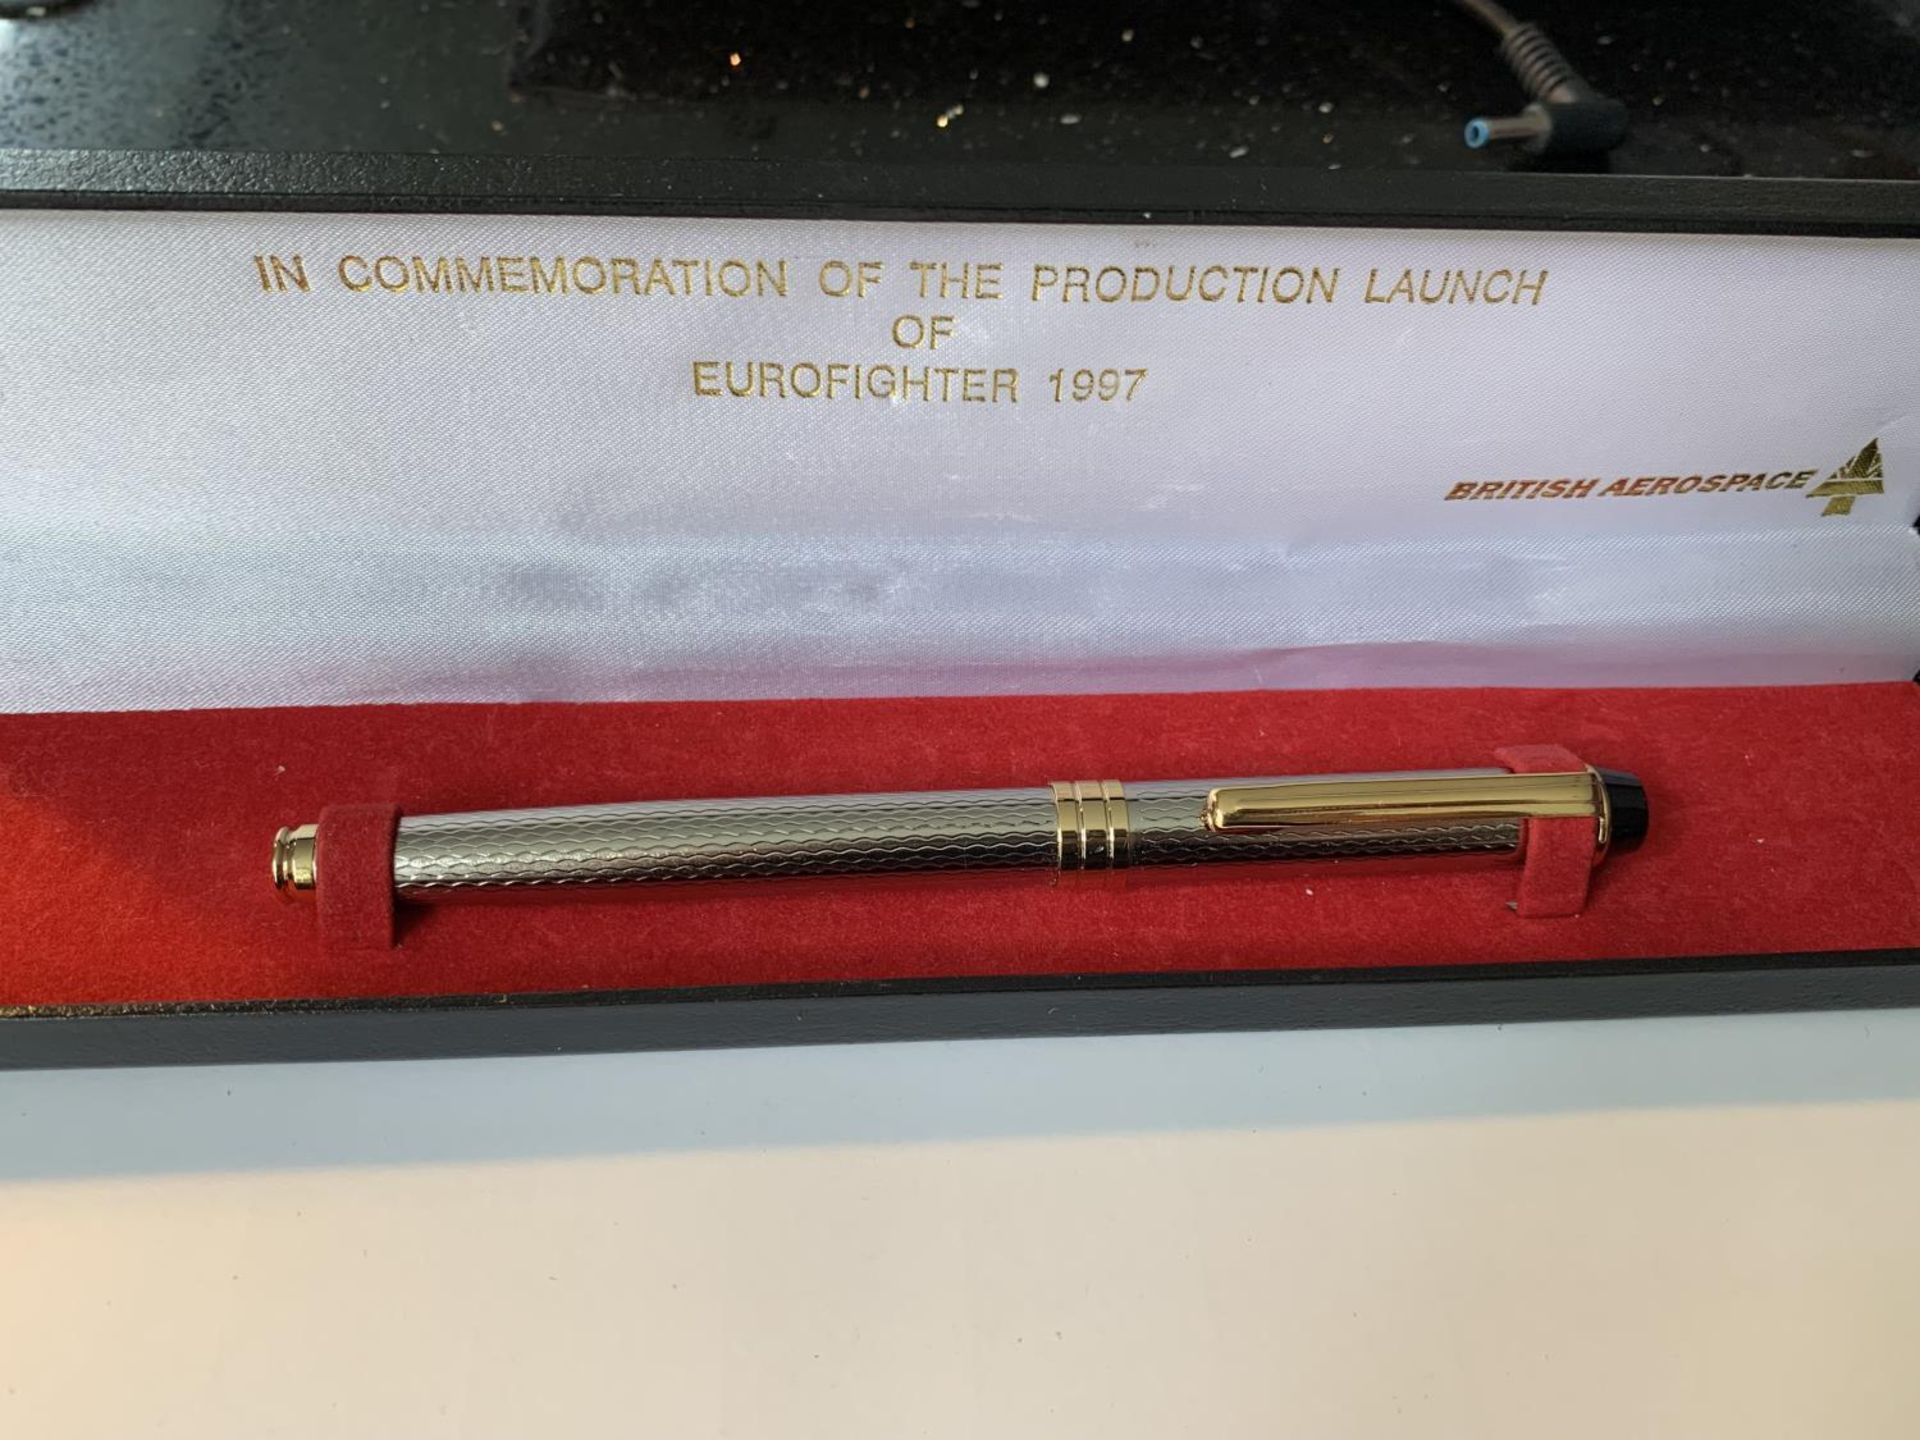 A BRITISH AEROSPACE FOUNTAIN PEN BOXED IN COMMEMORATION OF THE PRODUCTION LAUNCH OF EURO FIGHTER - Image 4 of 4